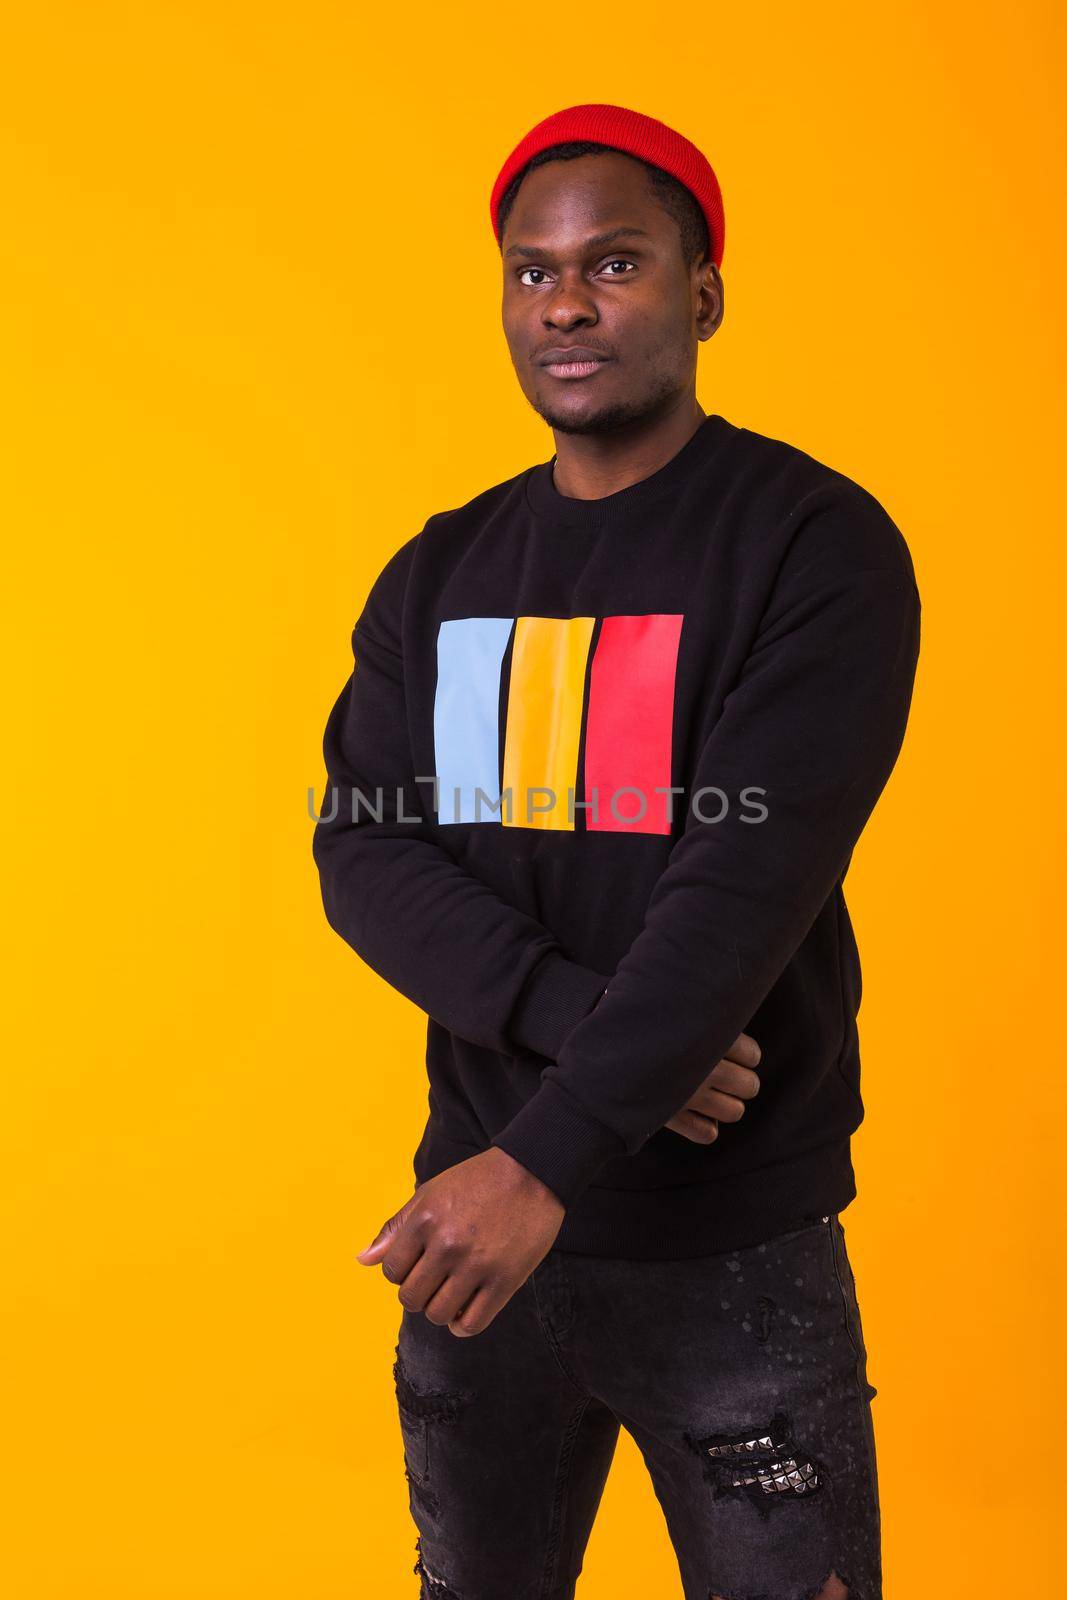 Youth street fashion concept - Portrait of confident sexy black man in stylish sweatshirt on yellow background. by Satura86